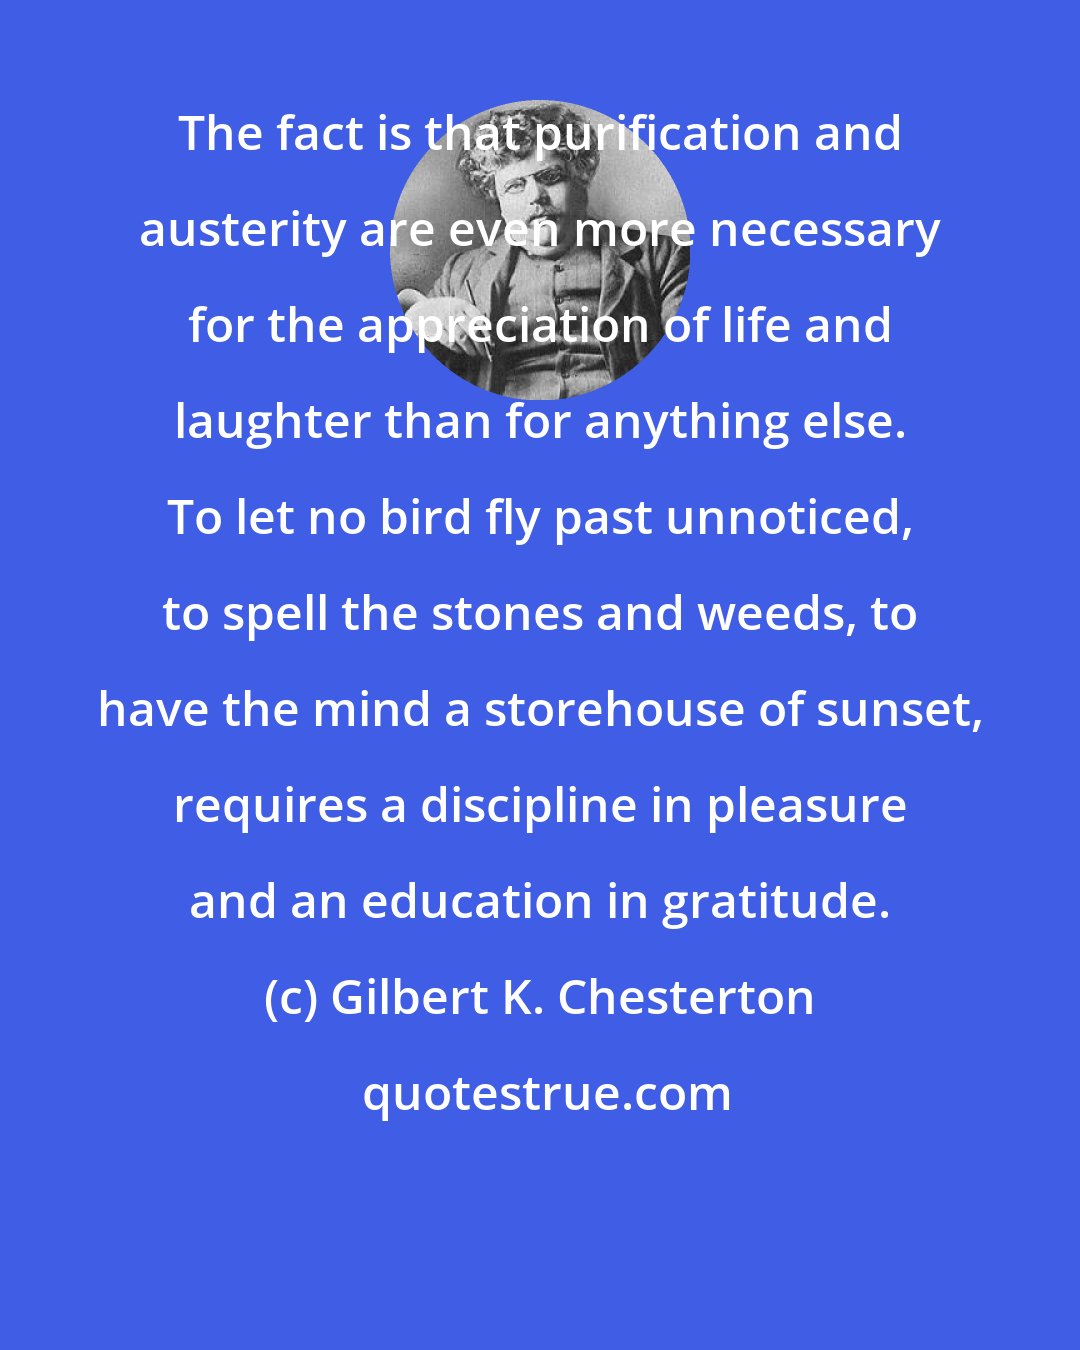 Gilbert K. Chesterton: The fact is that purification and austerity are even more necessary for the appreciation of life and laughter than for anything else. To let no bird fly past unnoticed, to spell the stones and weeds, to have the mind a storehouse of sunset, requires a discipline in pleasure and an education in gratitude.